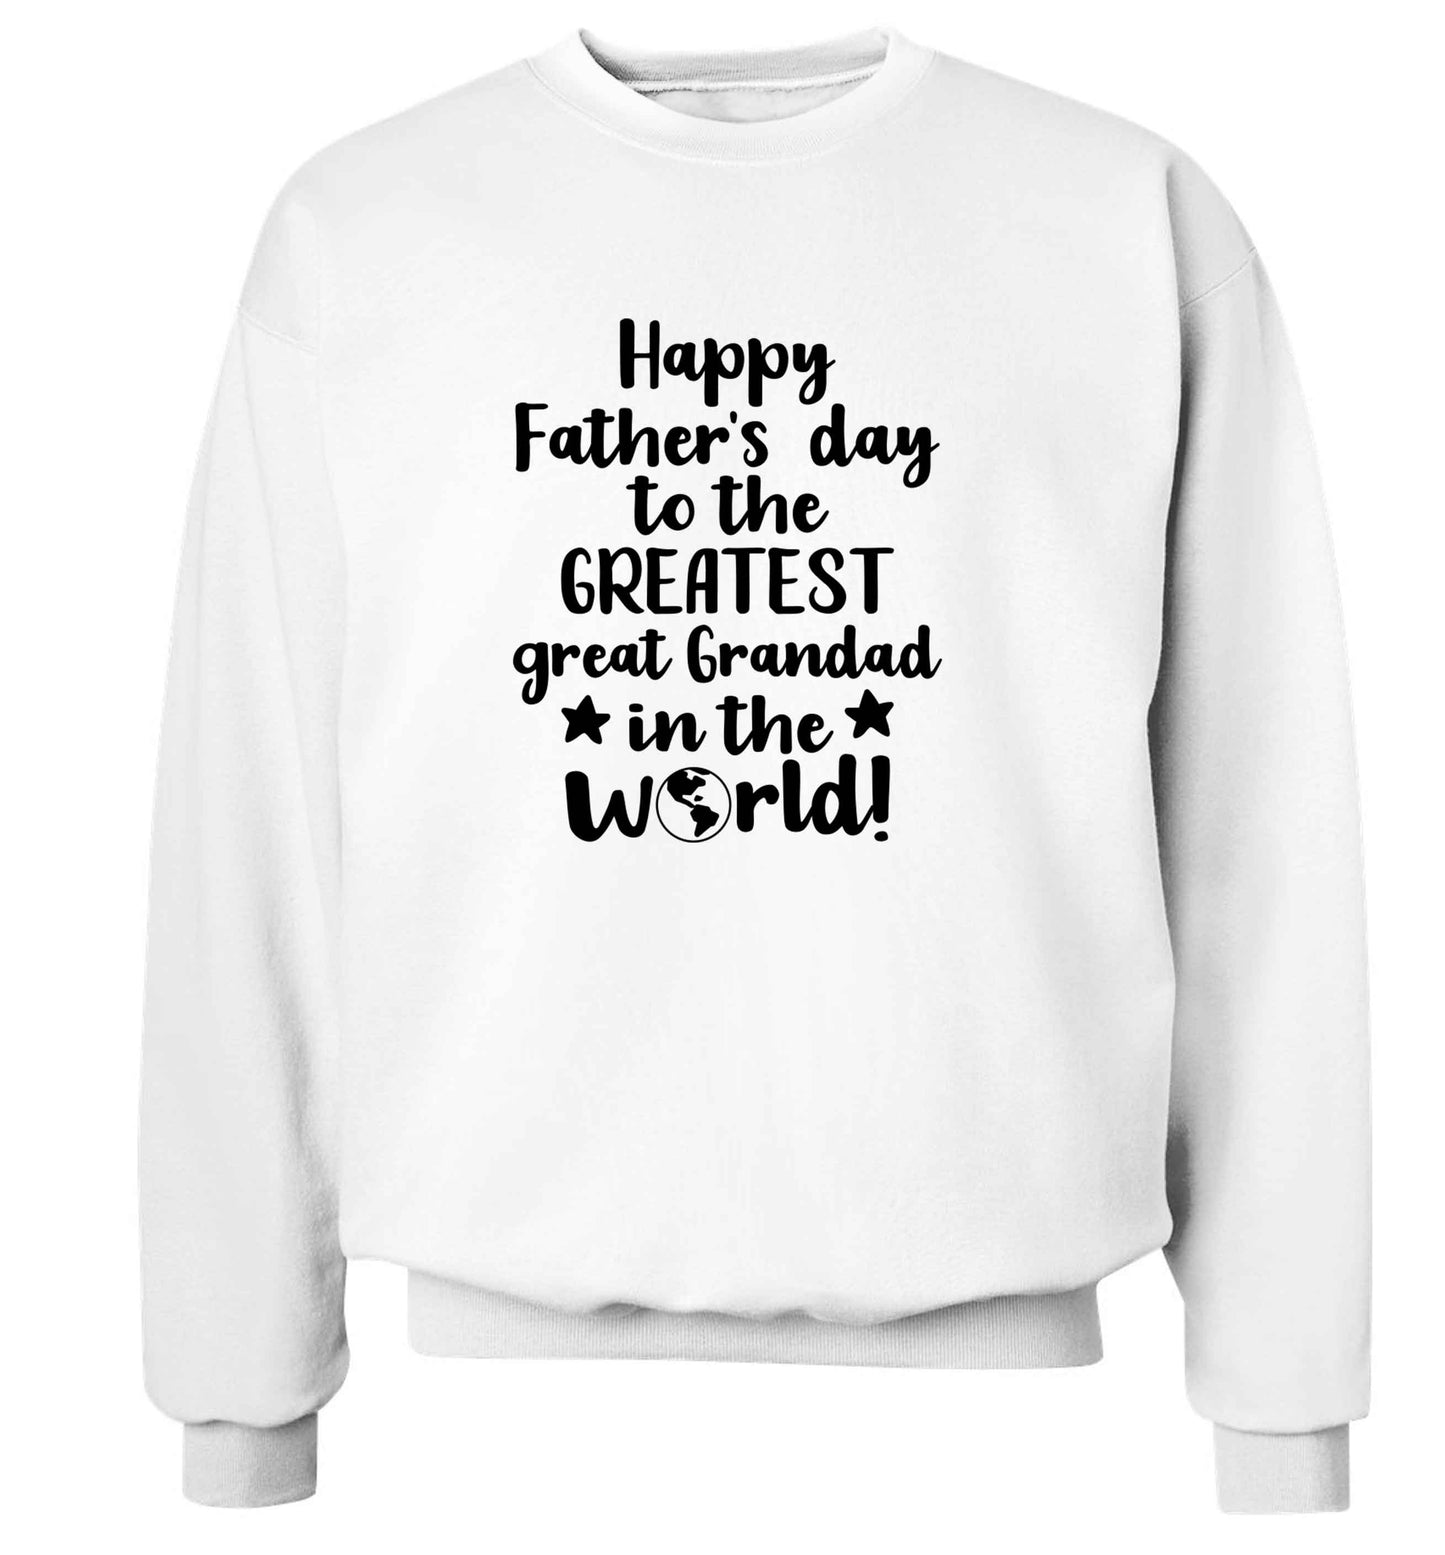 Happy Father's day to the greatest great grandad in the world adult's unisex white sweater 2XL